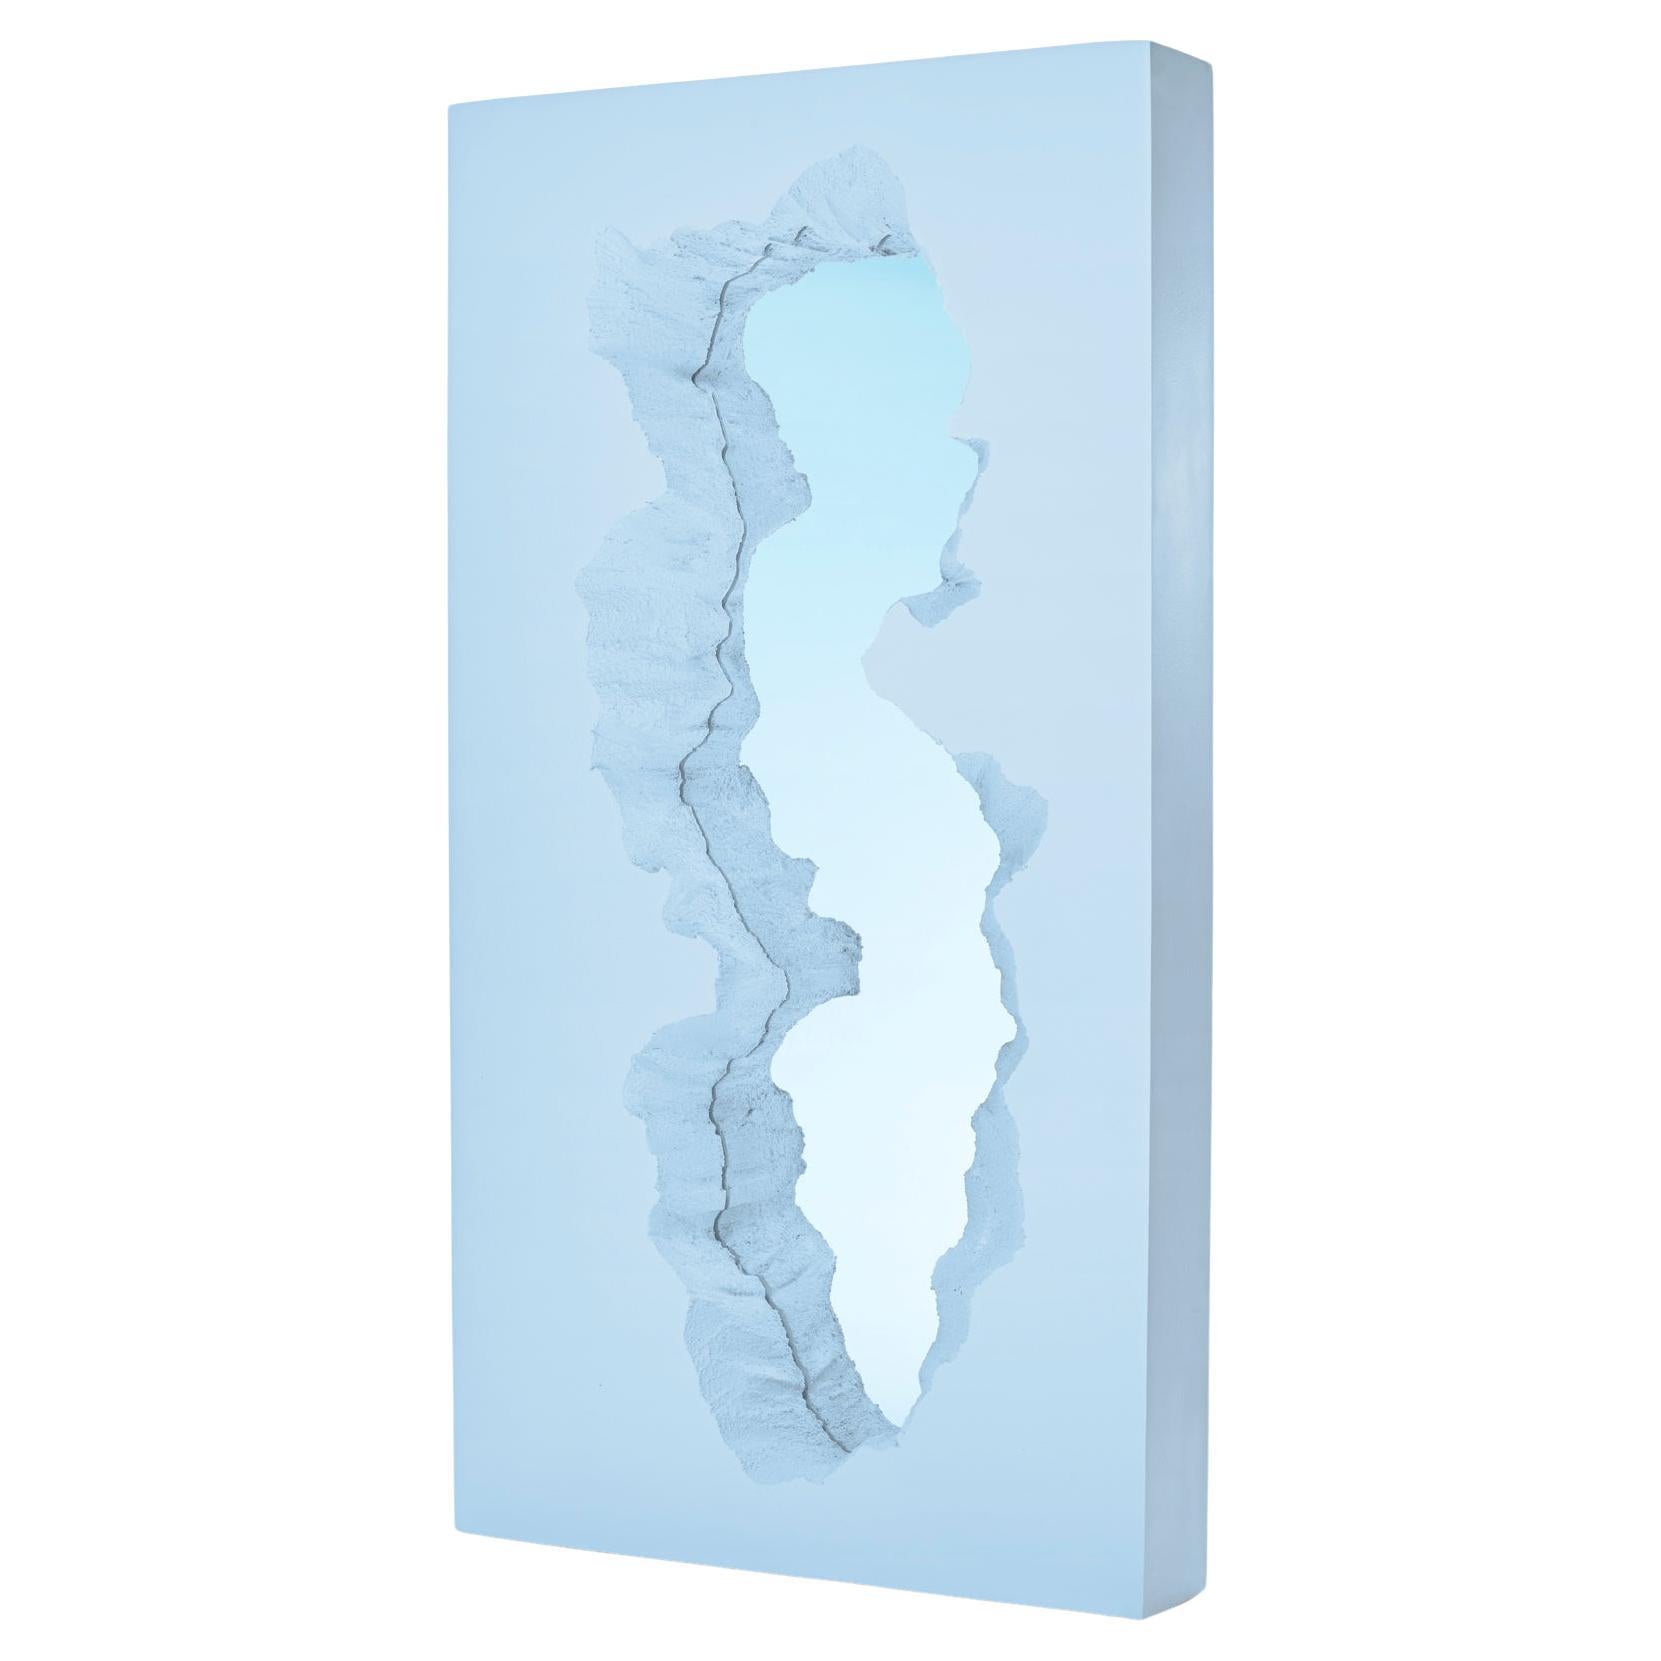 Broken mirror is a mirror born from the encounter between Gufram and New York Snarkitecture studio. The reflecting surface is surrounded by a frame of soft polyurethane – a direct reference to Gufram's material par excellence; this creates an